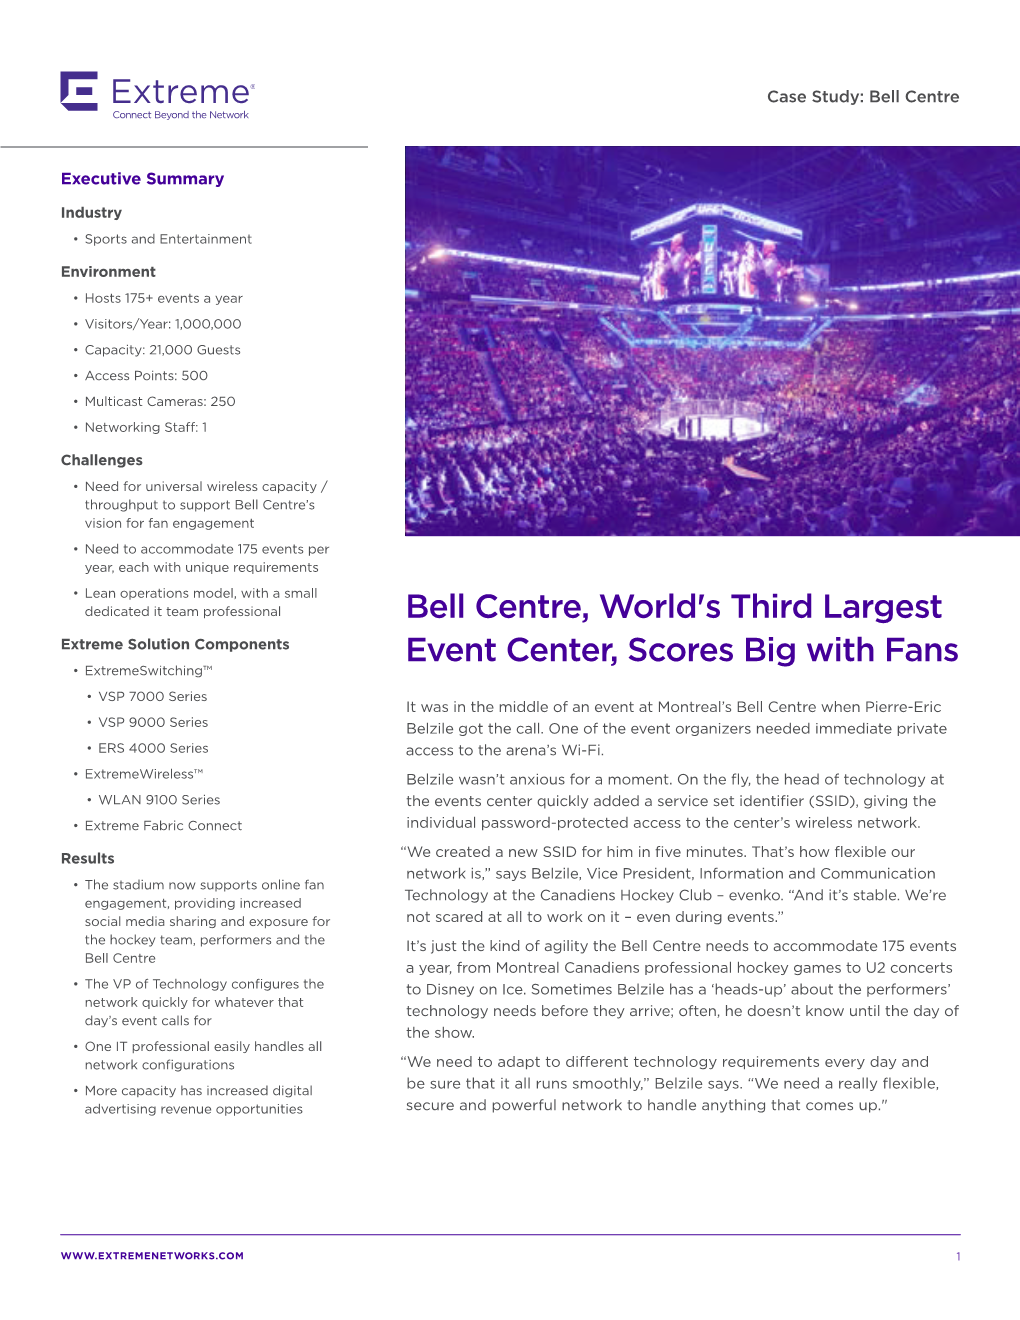 Bell Centre, World's Third Largest Event Center, Scores Big with Fans